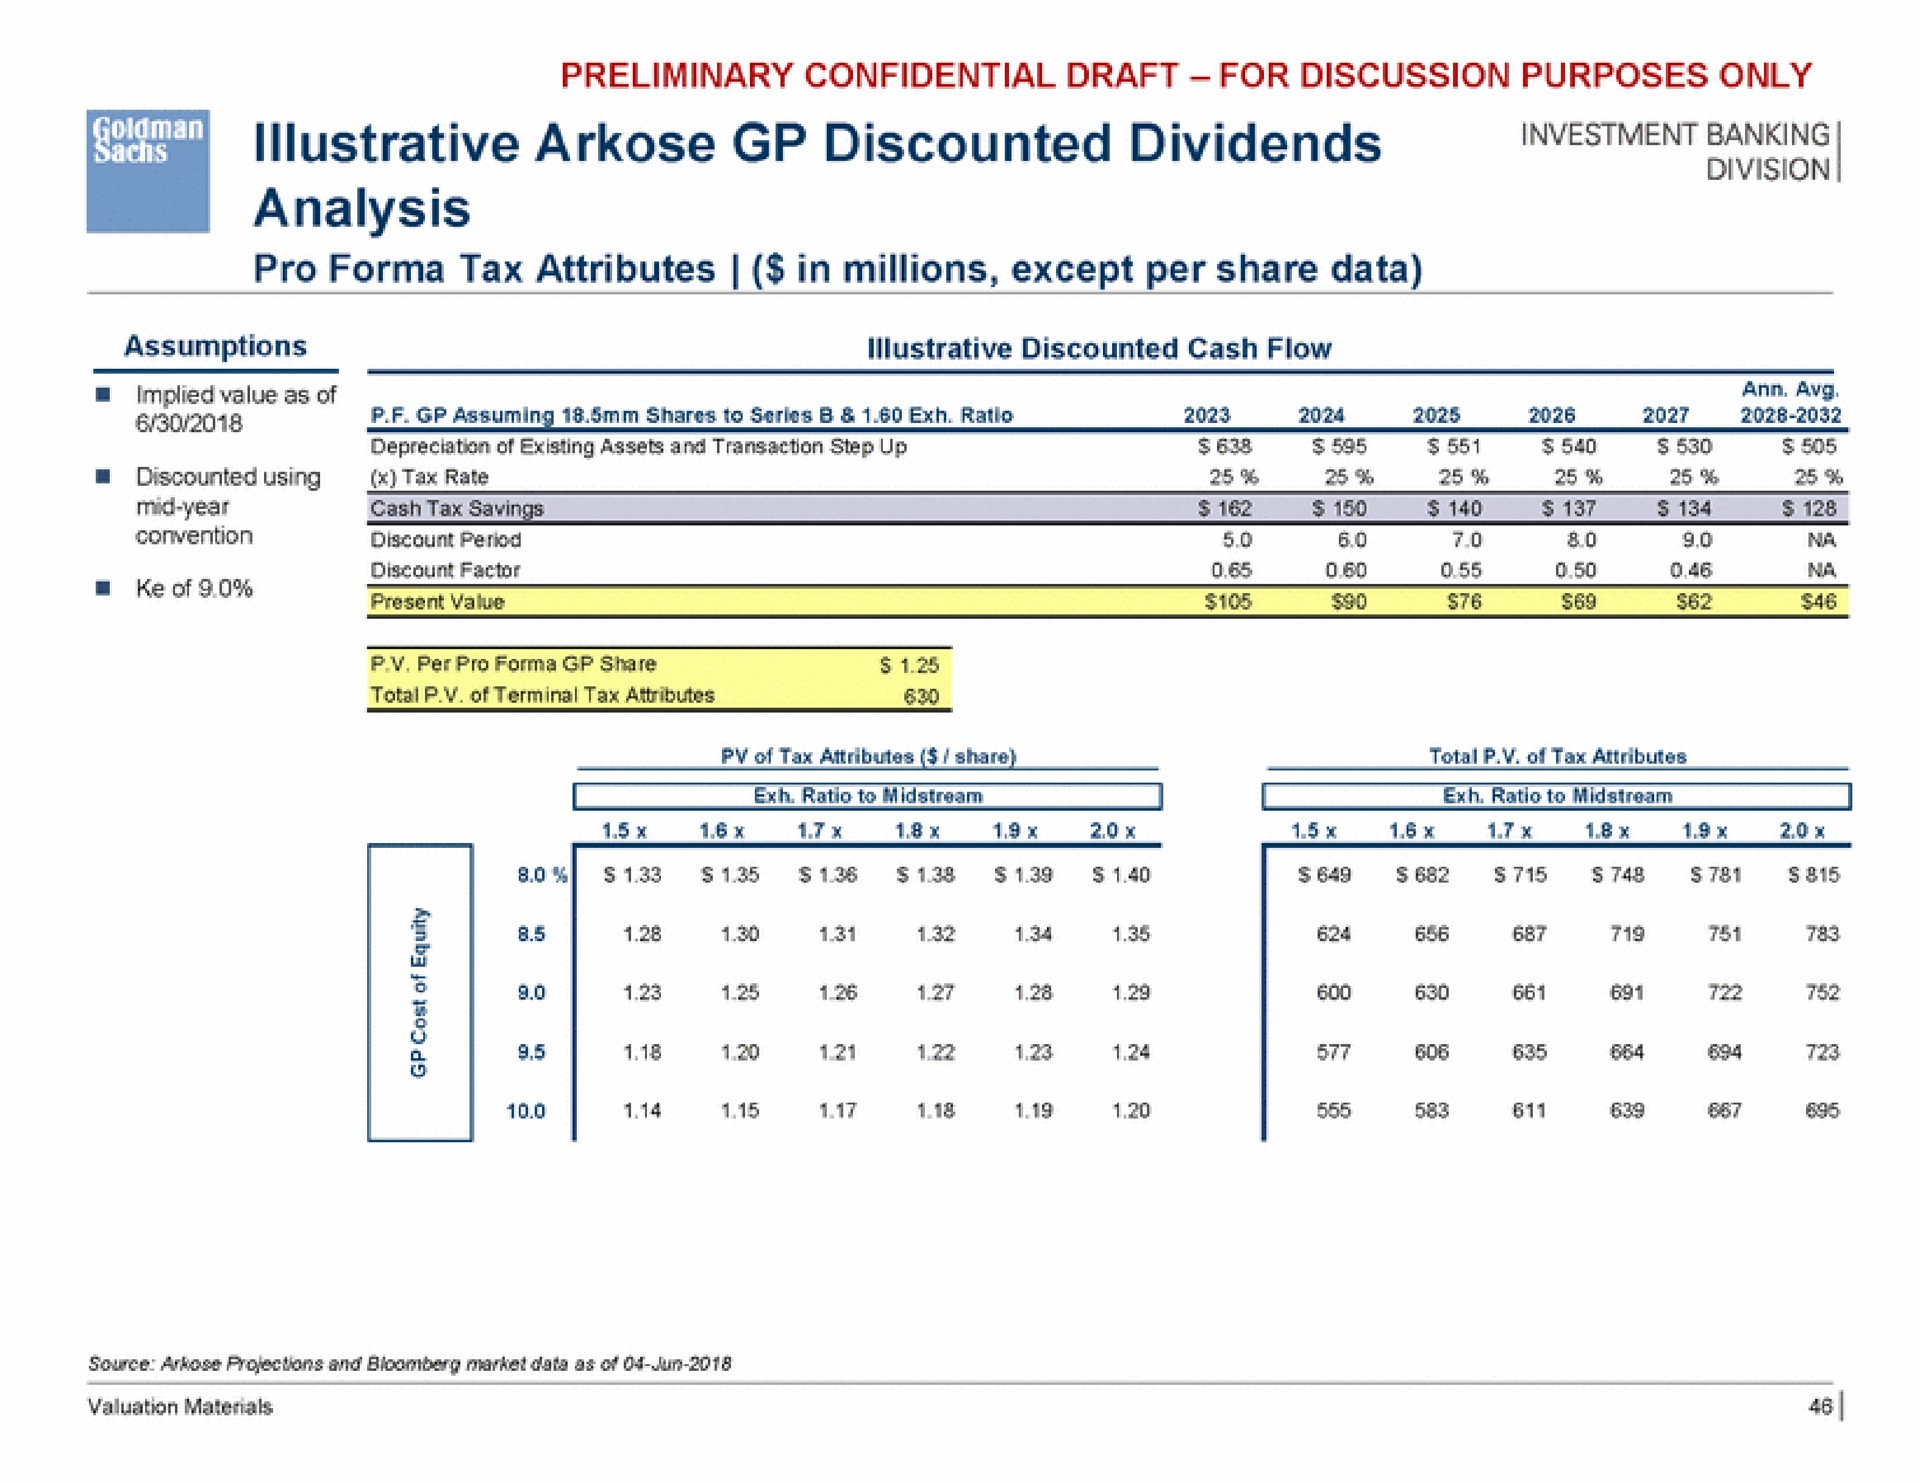 investment banking illustrative arkose discounted dividends analysis | Goldman Sachs